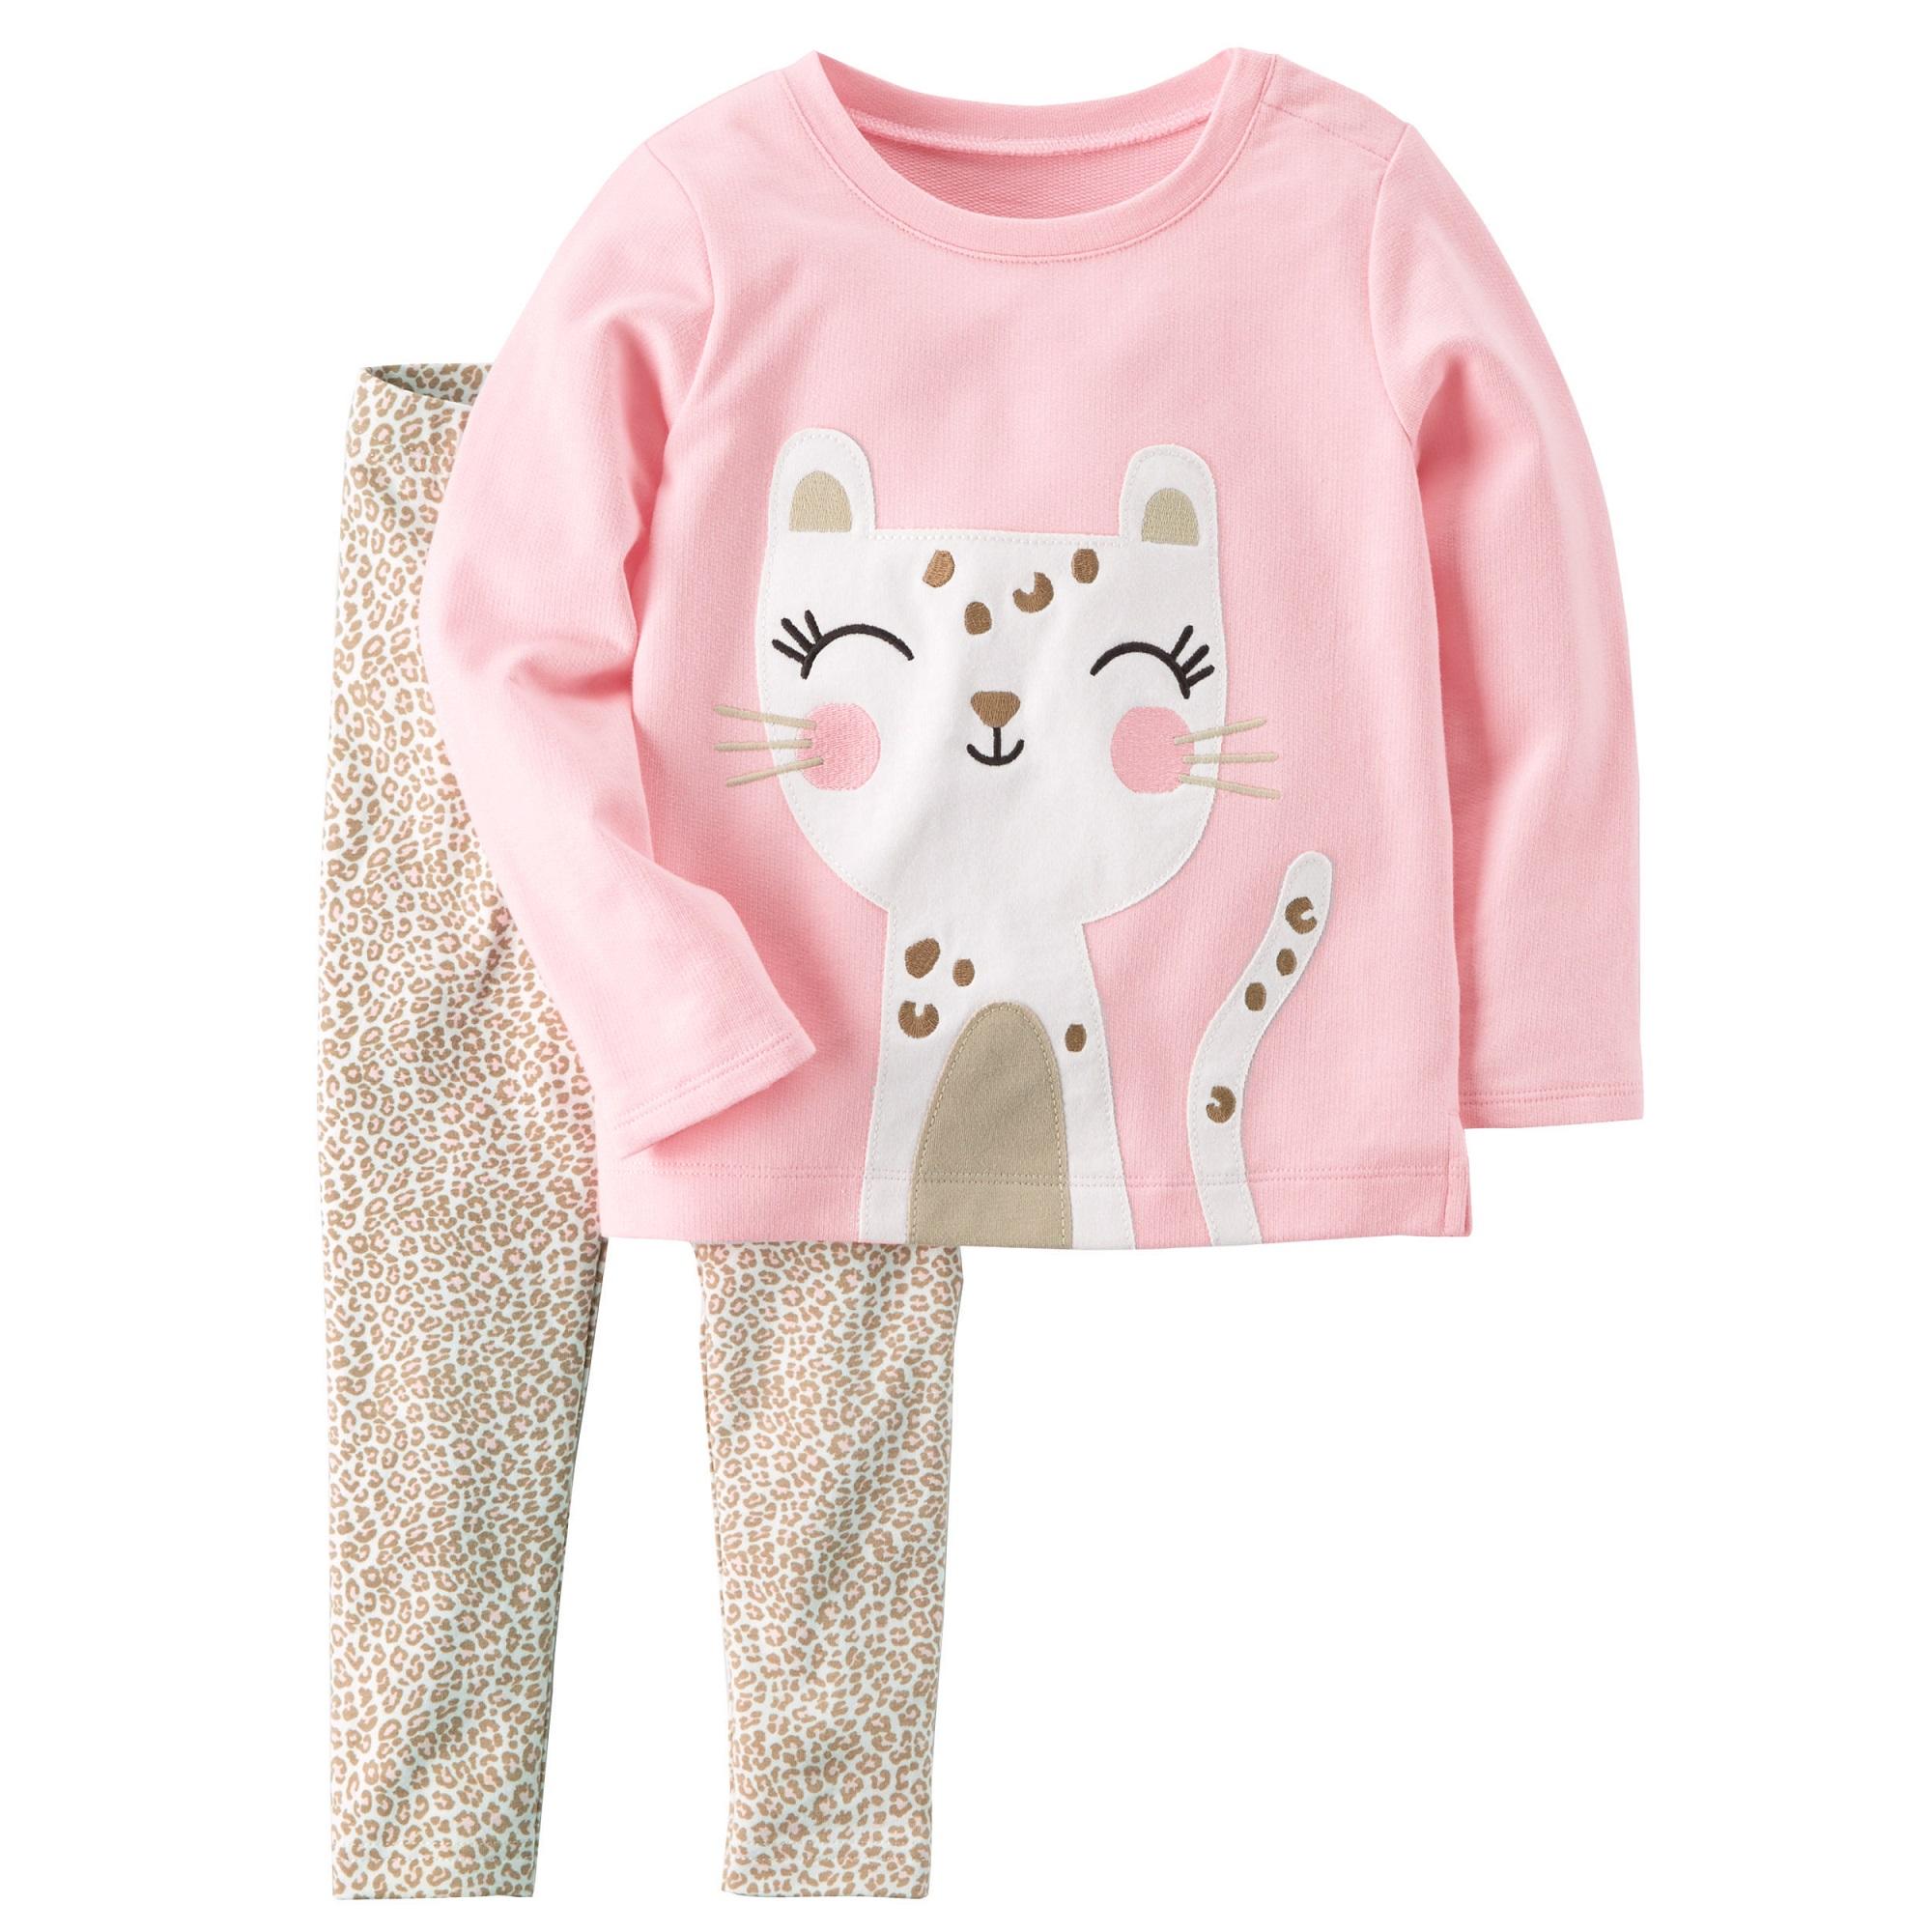 Carter's - 2 Pieces French Terry Top & Cheetah Legging Set